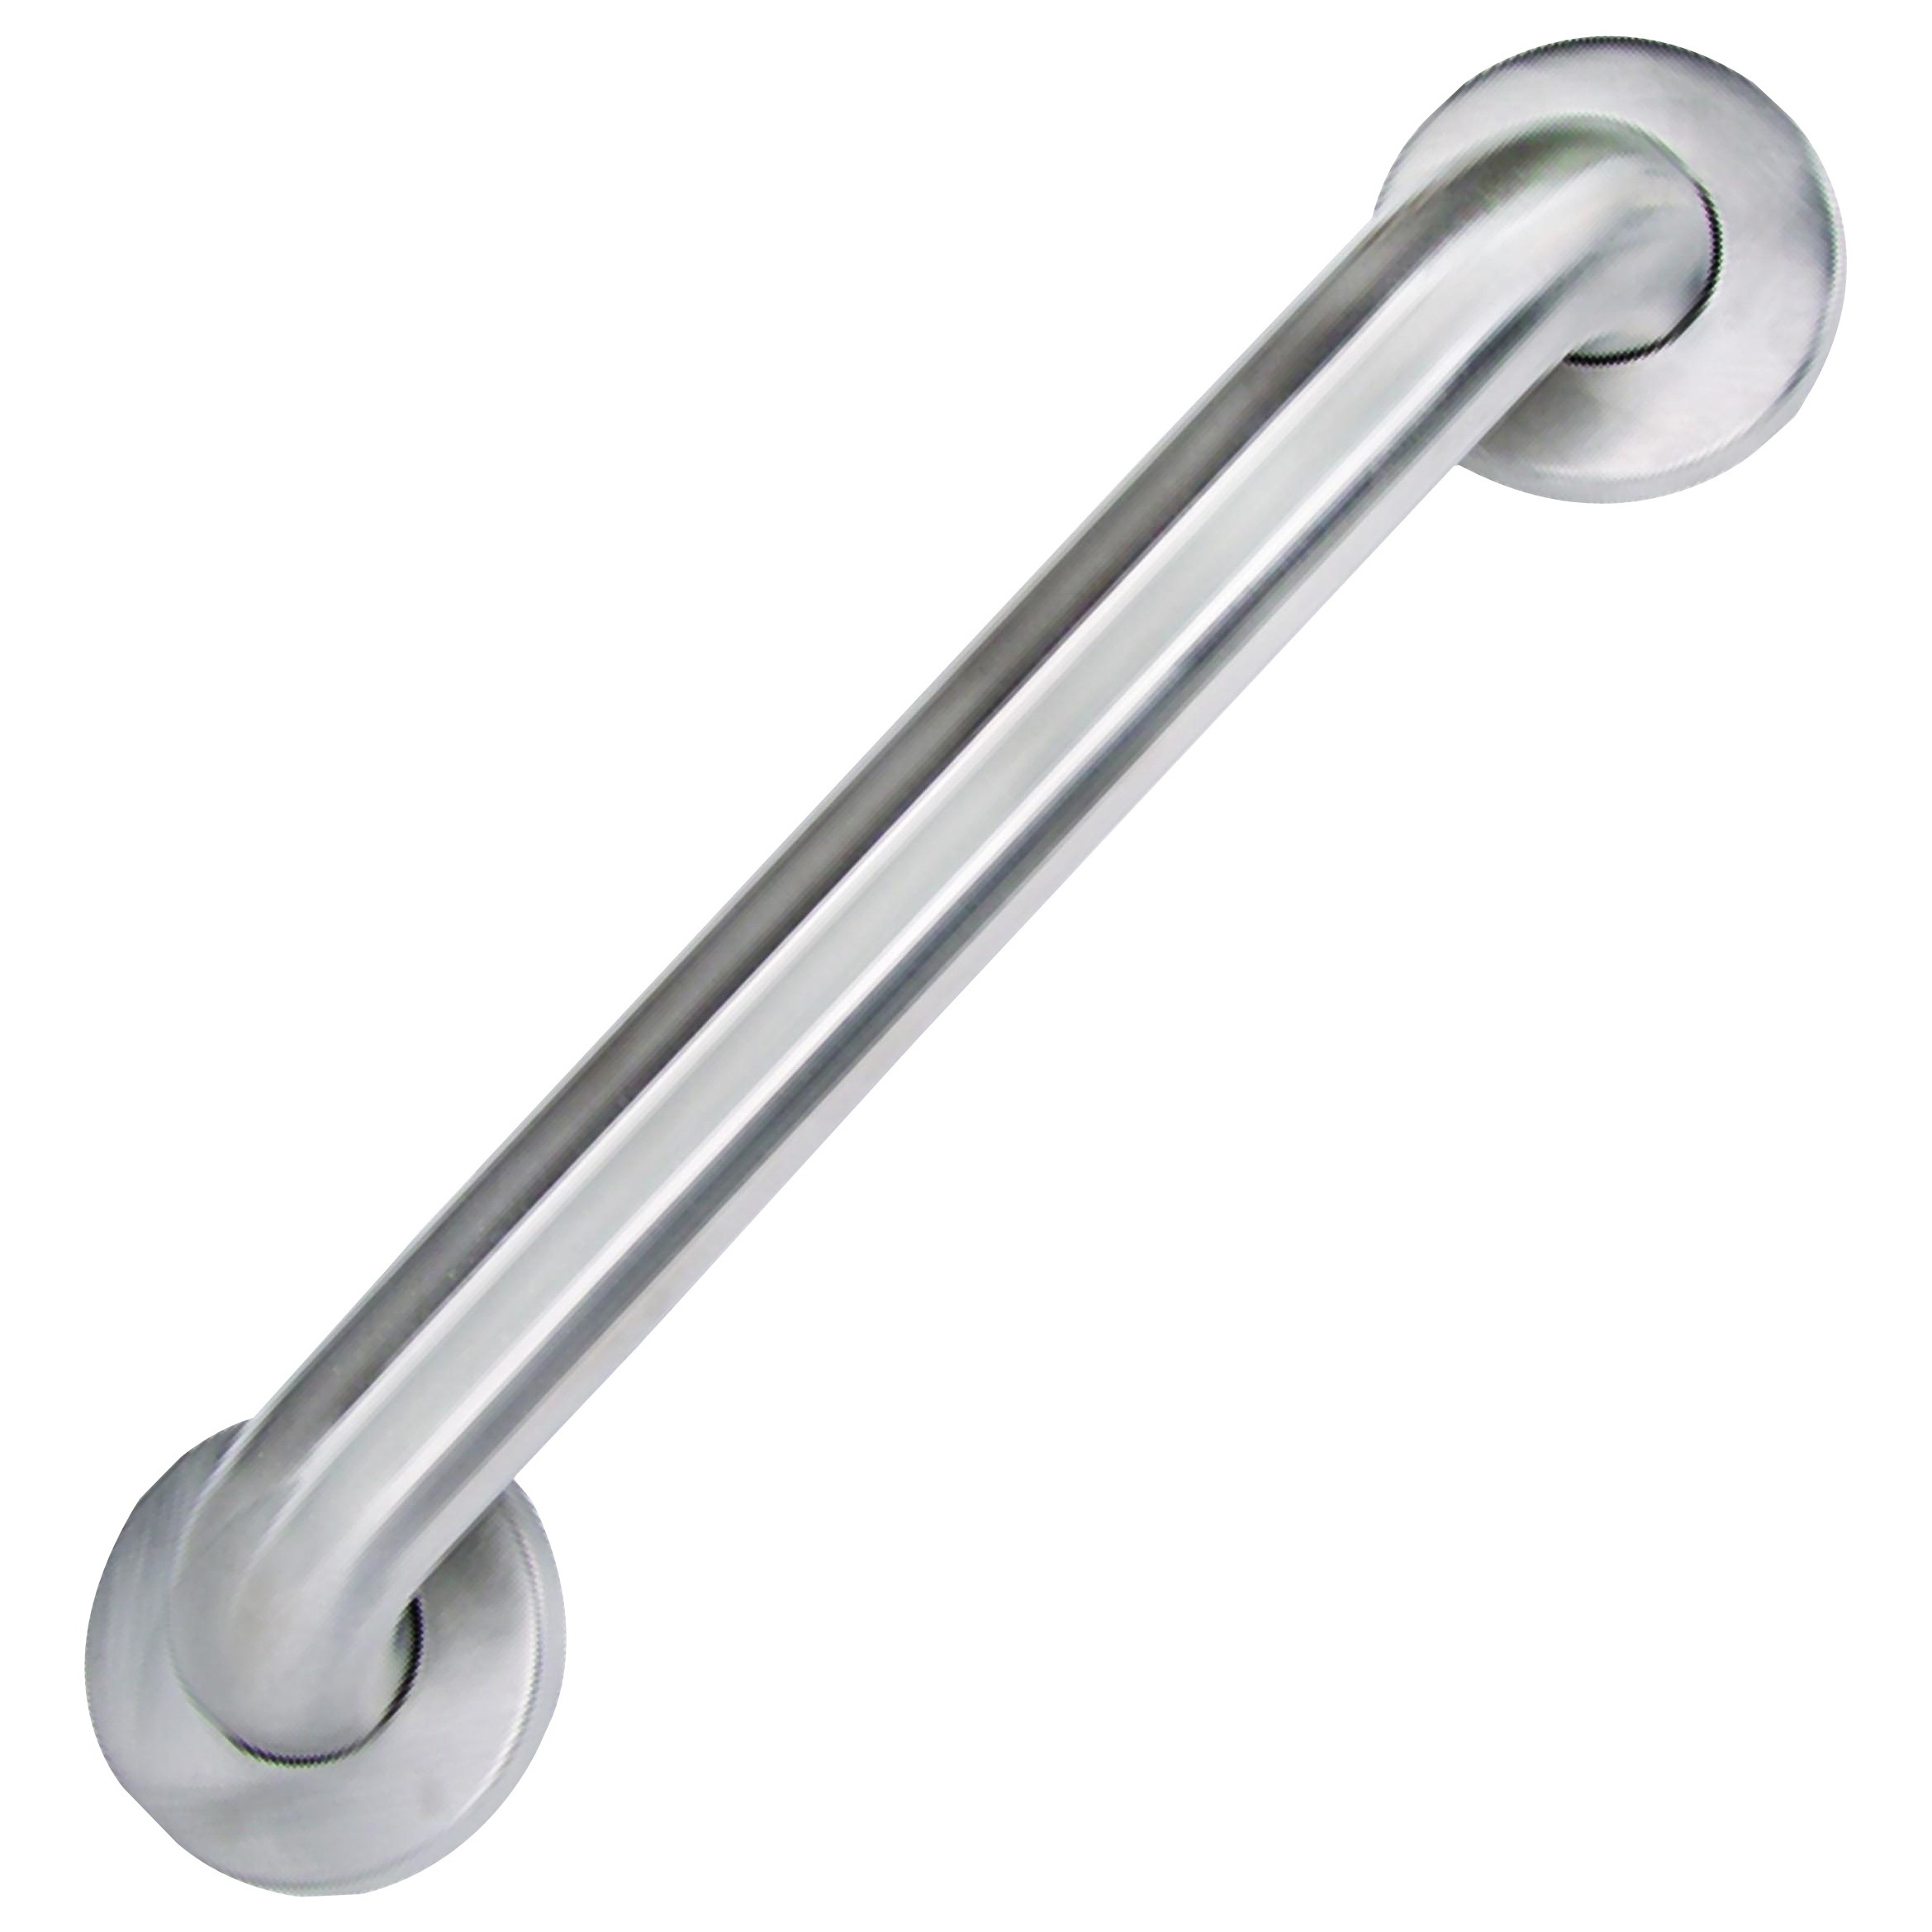 SG01-01&0112 Grab Bar, 12 in L Bar, Stainless Steel, Wall Mounted Mounting